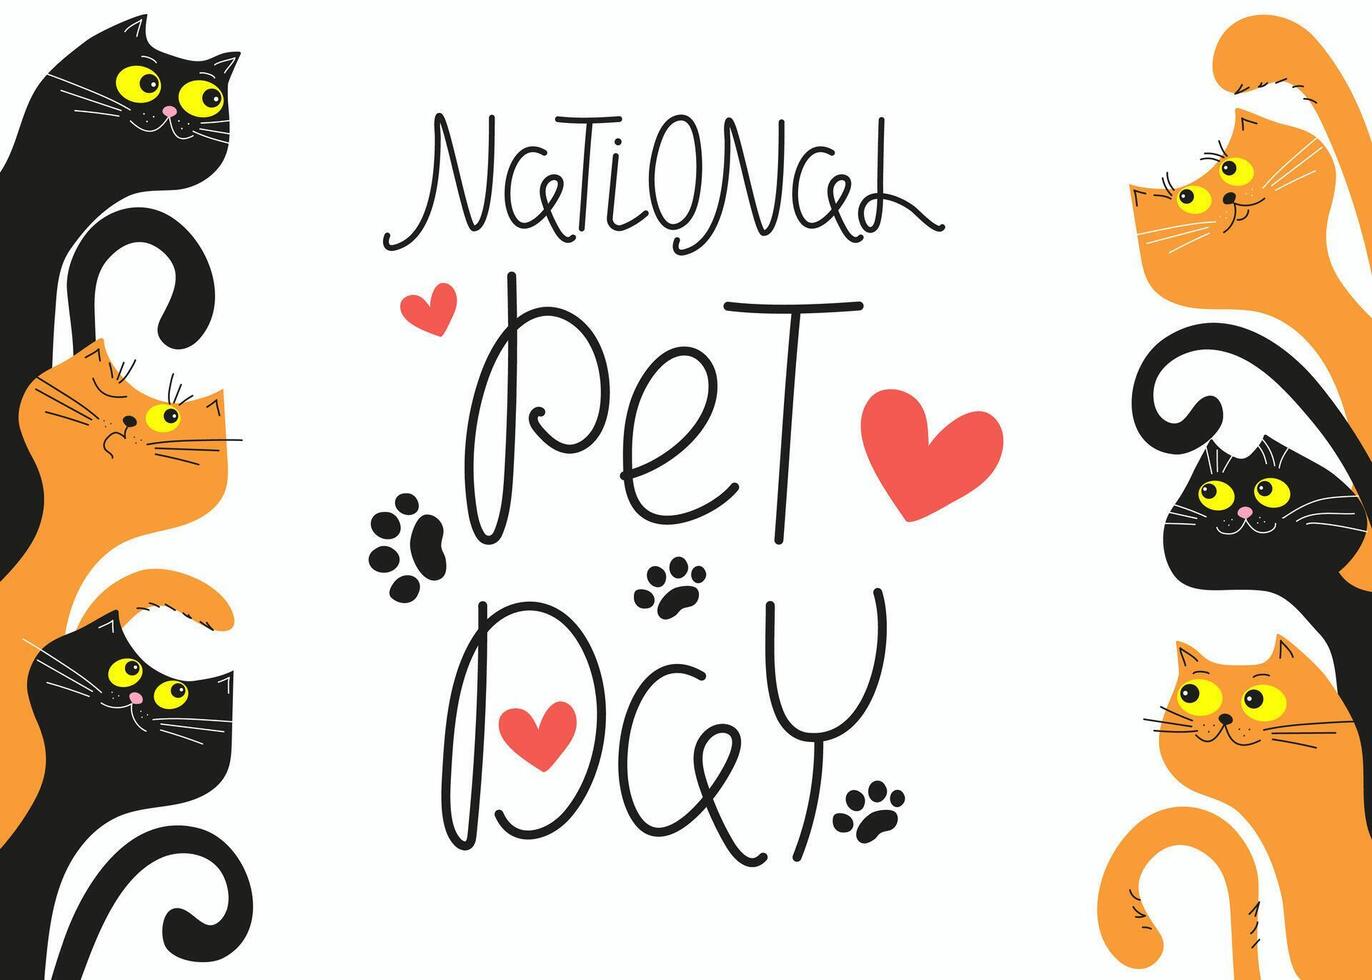 National Pet Day. Cute cartoon cats. 11 April. Inscription, lettering. Footprint, animal paw print, heart shape. Vector background for print design. Holiday social media post and card.